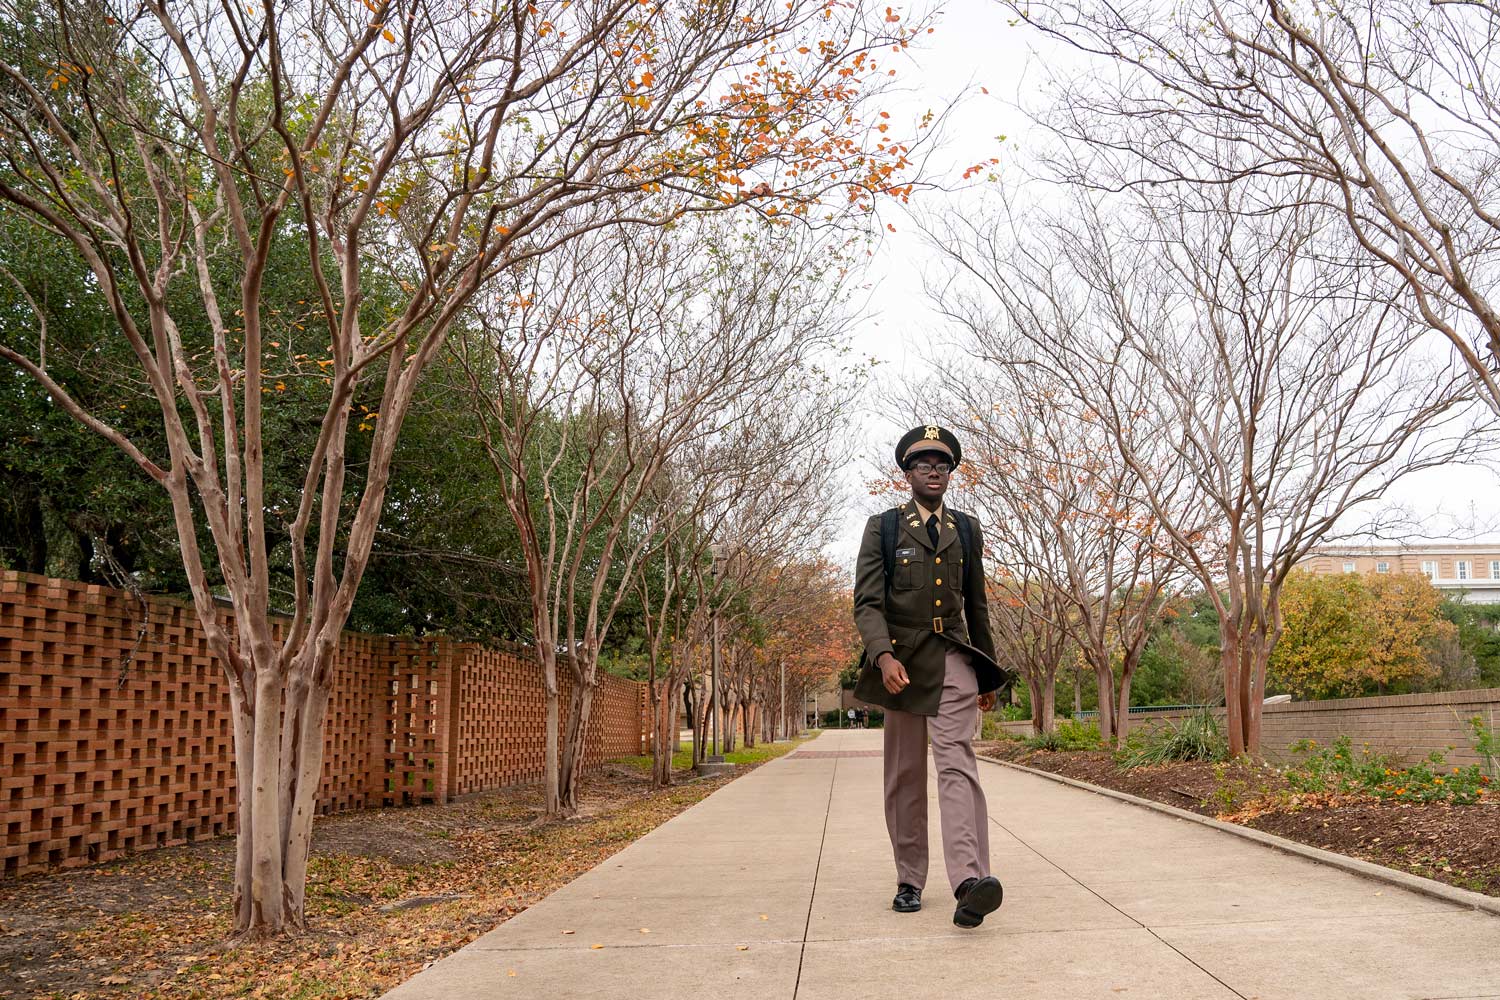 Corp of Cadet student dressed in uniform walking on campus.